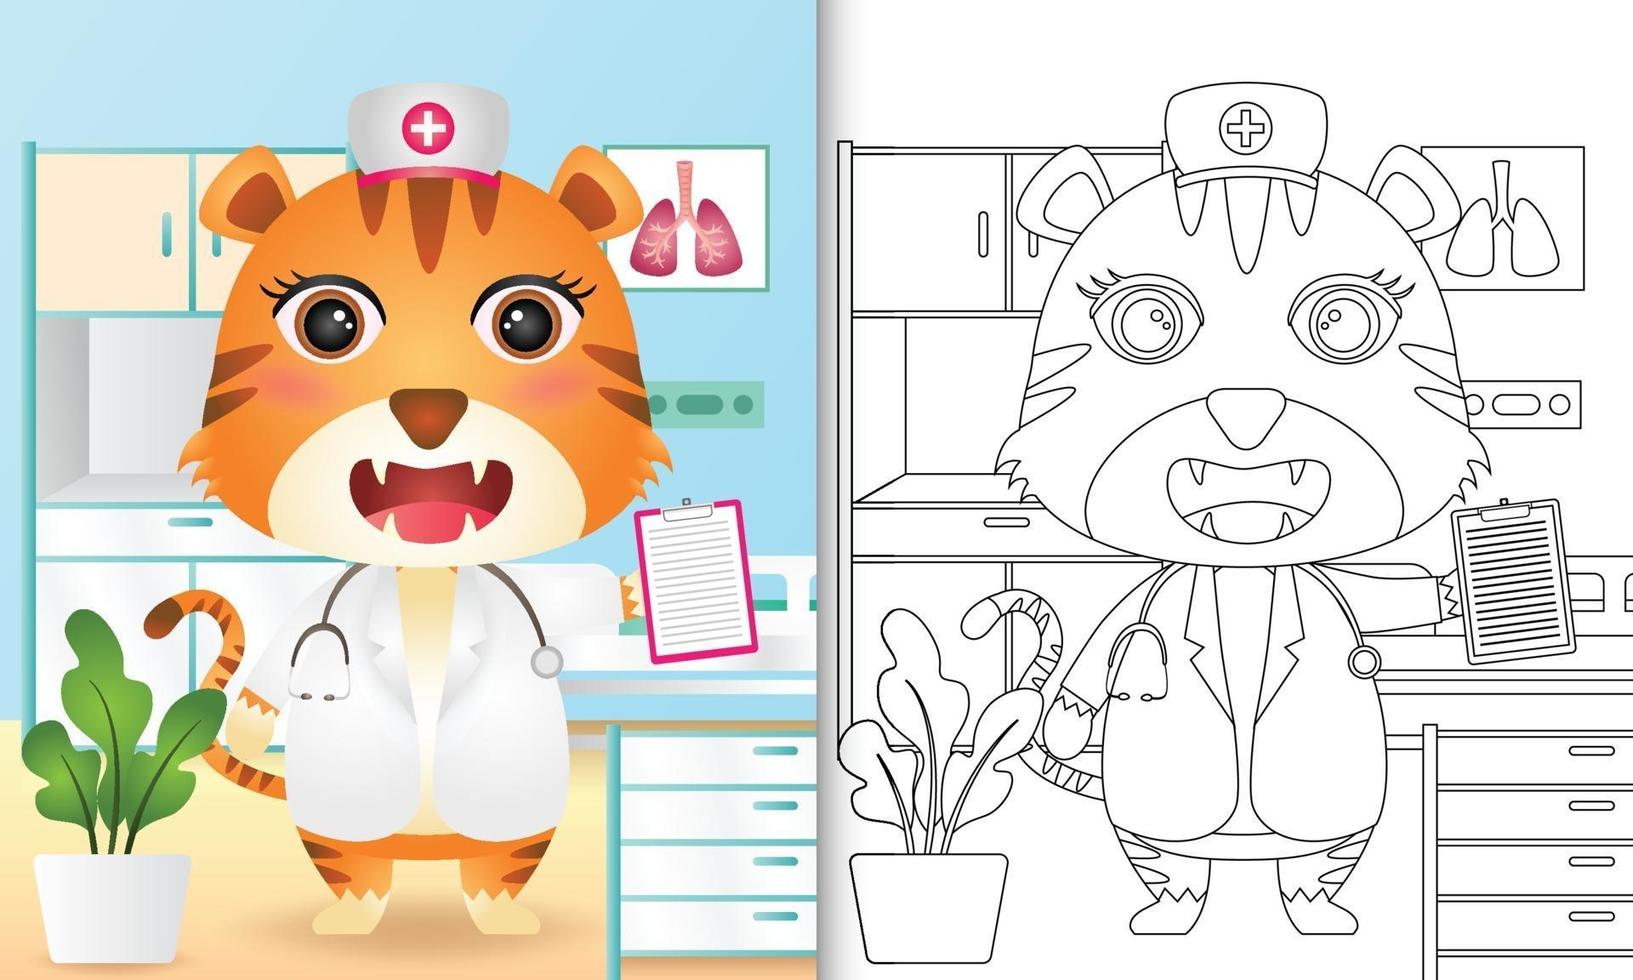 Coloring book for kids with a cute tiger nurse character illustration vector